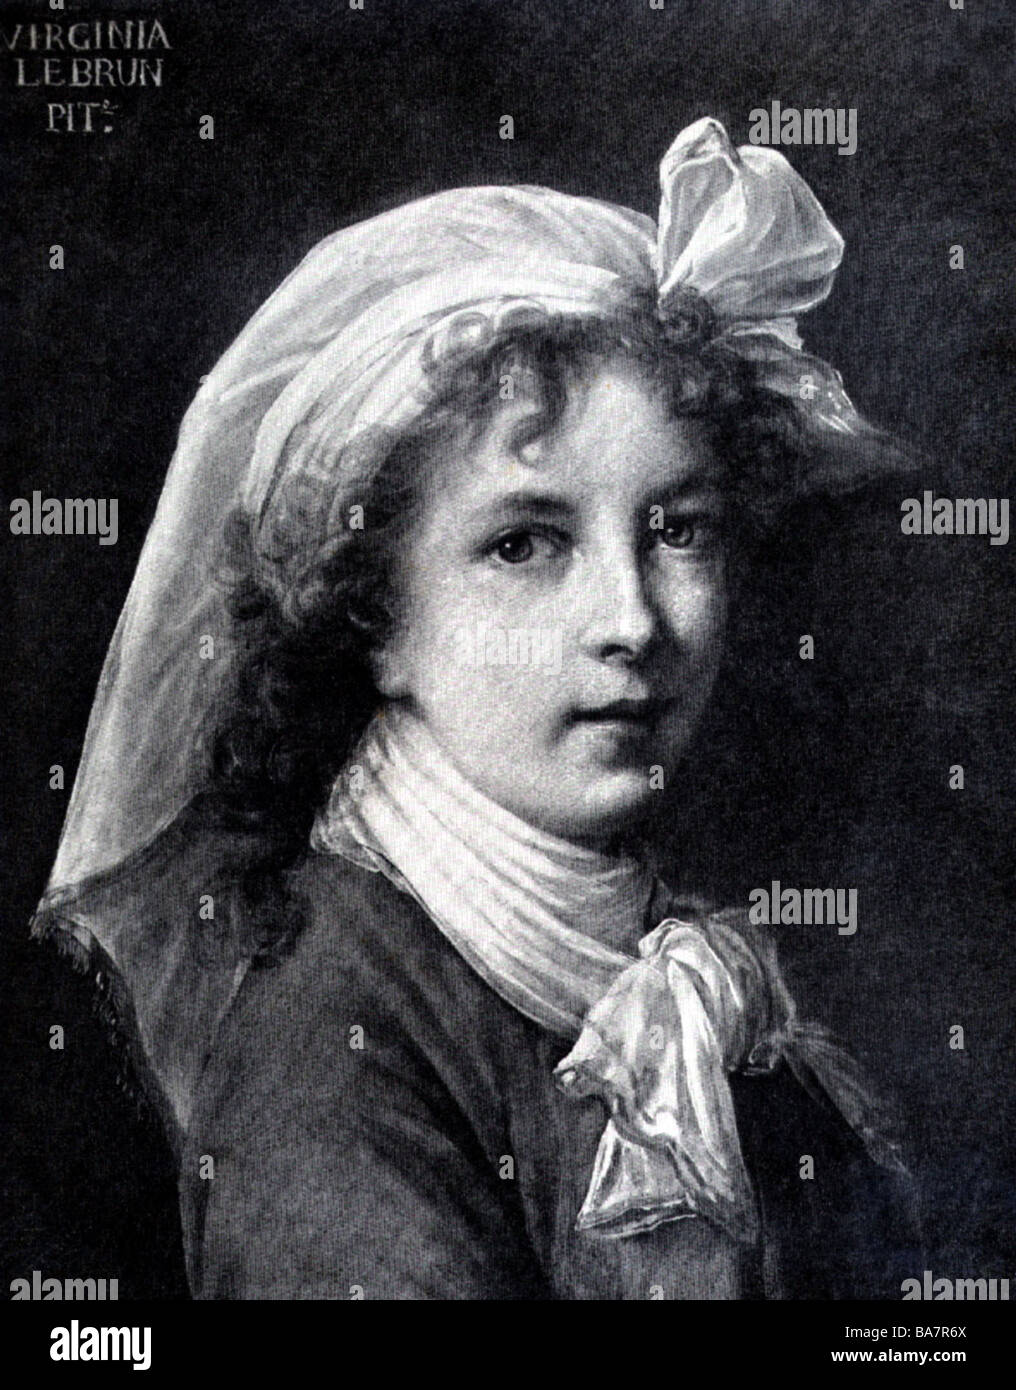 Vigee-Lebrun, Elisabeth Marie Louise, 16.4.1755 - 30.3.1842, pittore francese, ritratto, autoritratto, stampa, Foto Stock